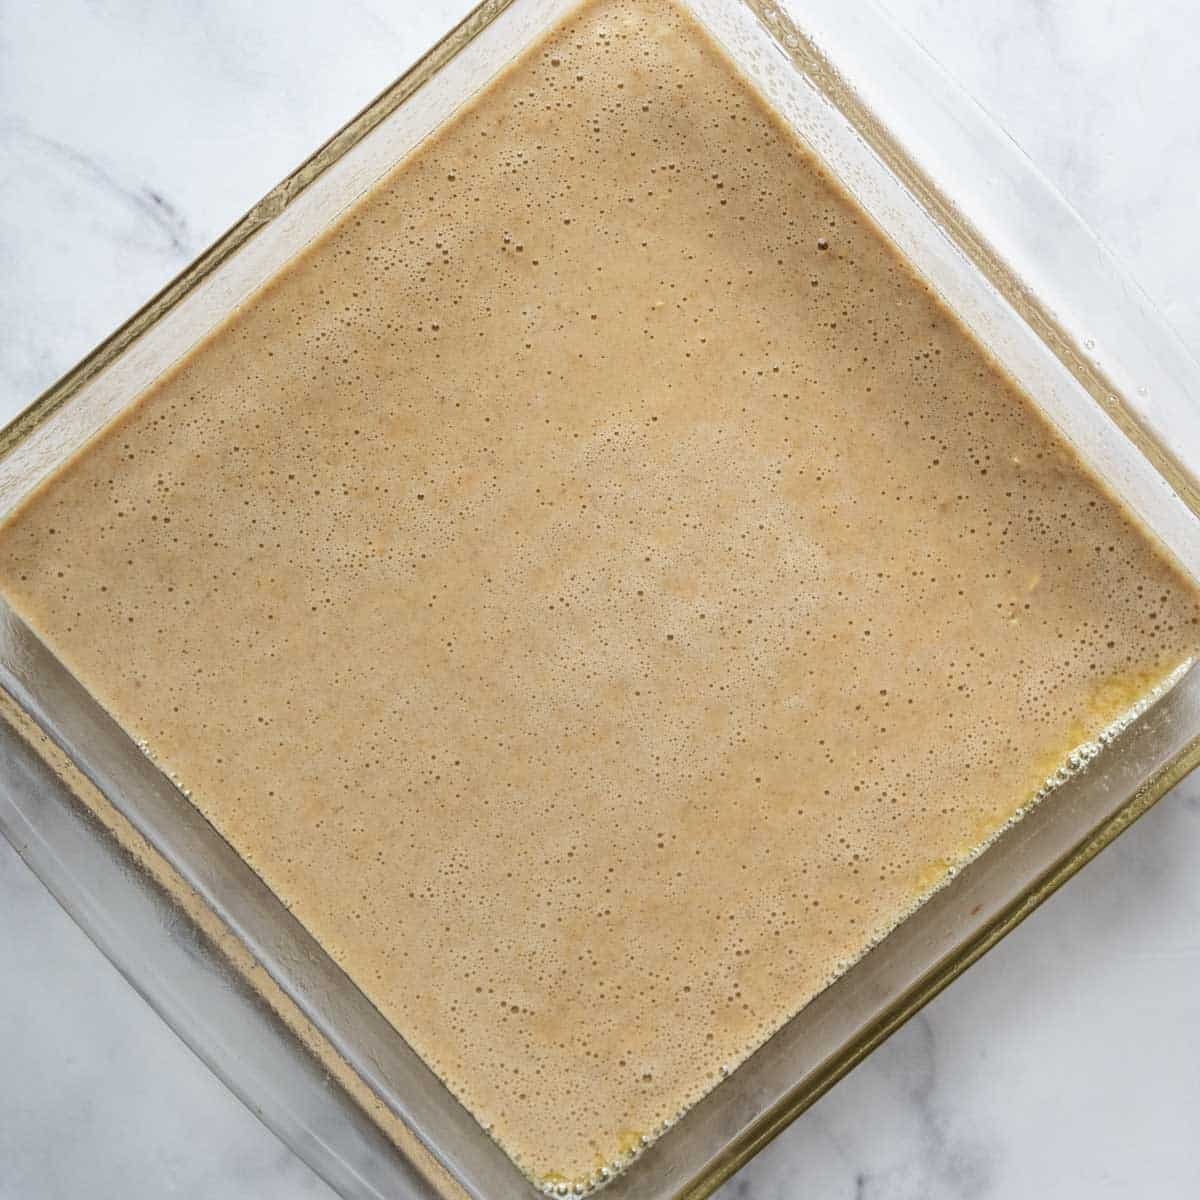 unbaked cake batter in the pan.